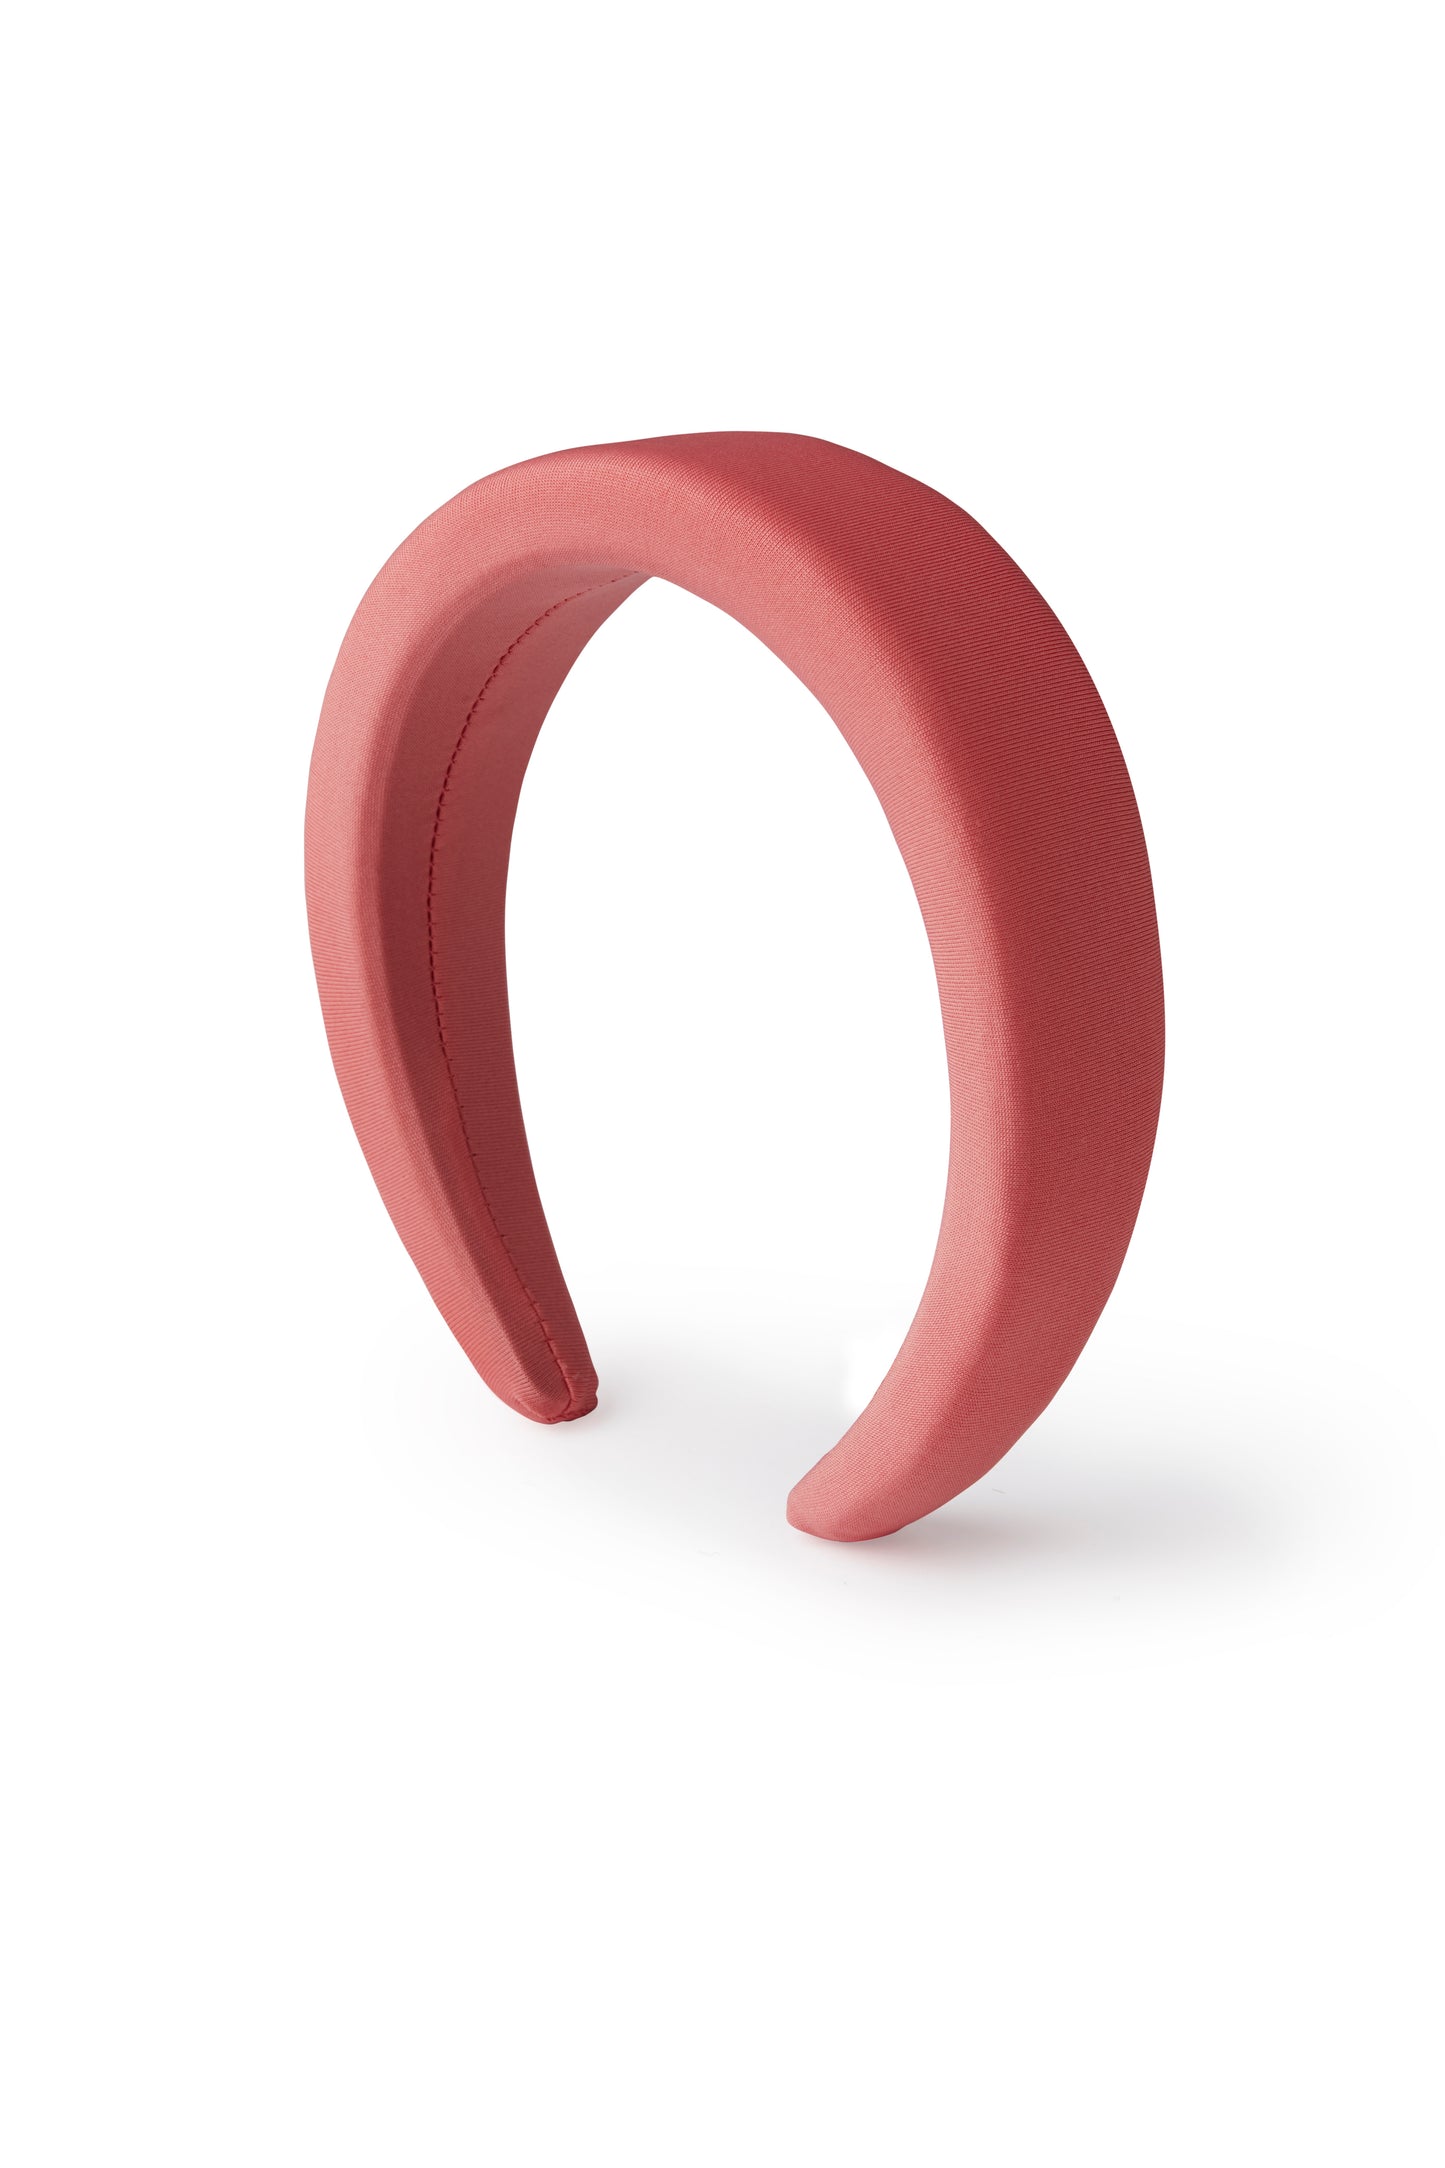 Padded hairband in pink color